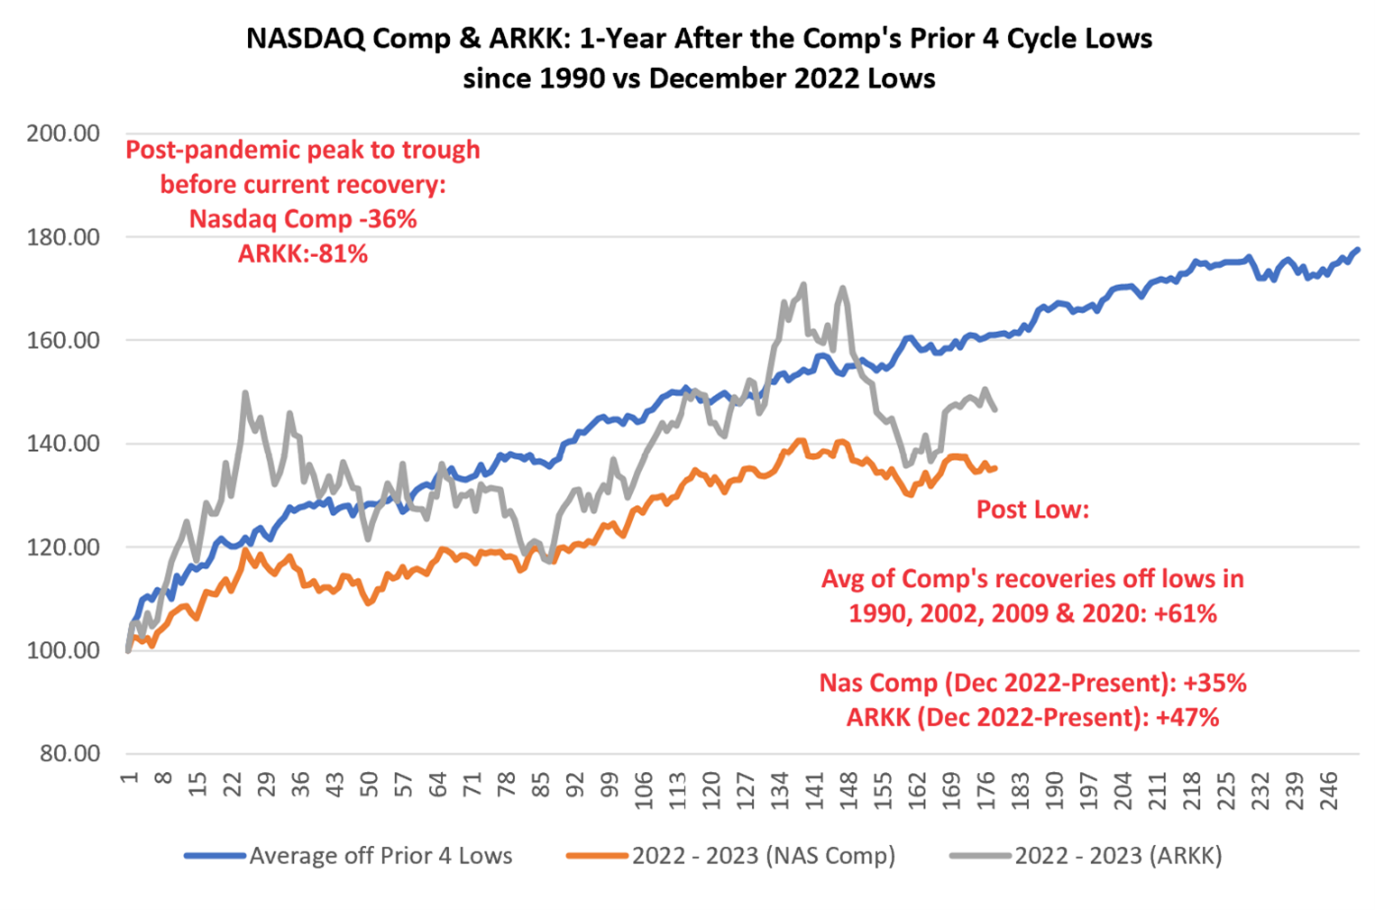 NASDAQ Comp & ARKK 1- Year After the Comp's Prior 4 Cycle Lows since 1990 vs December 2022 Lows